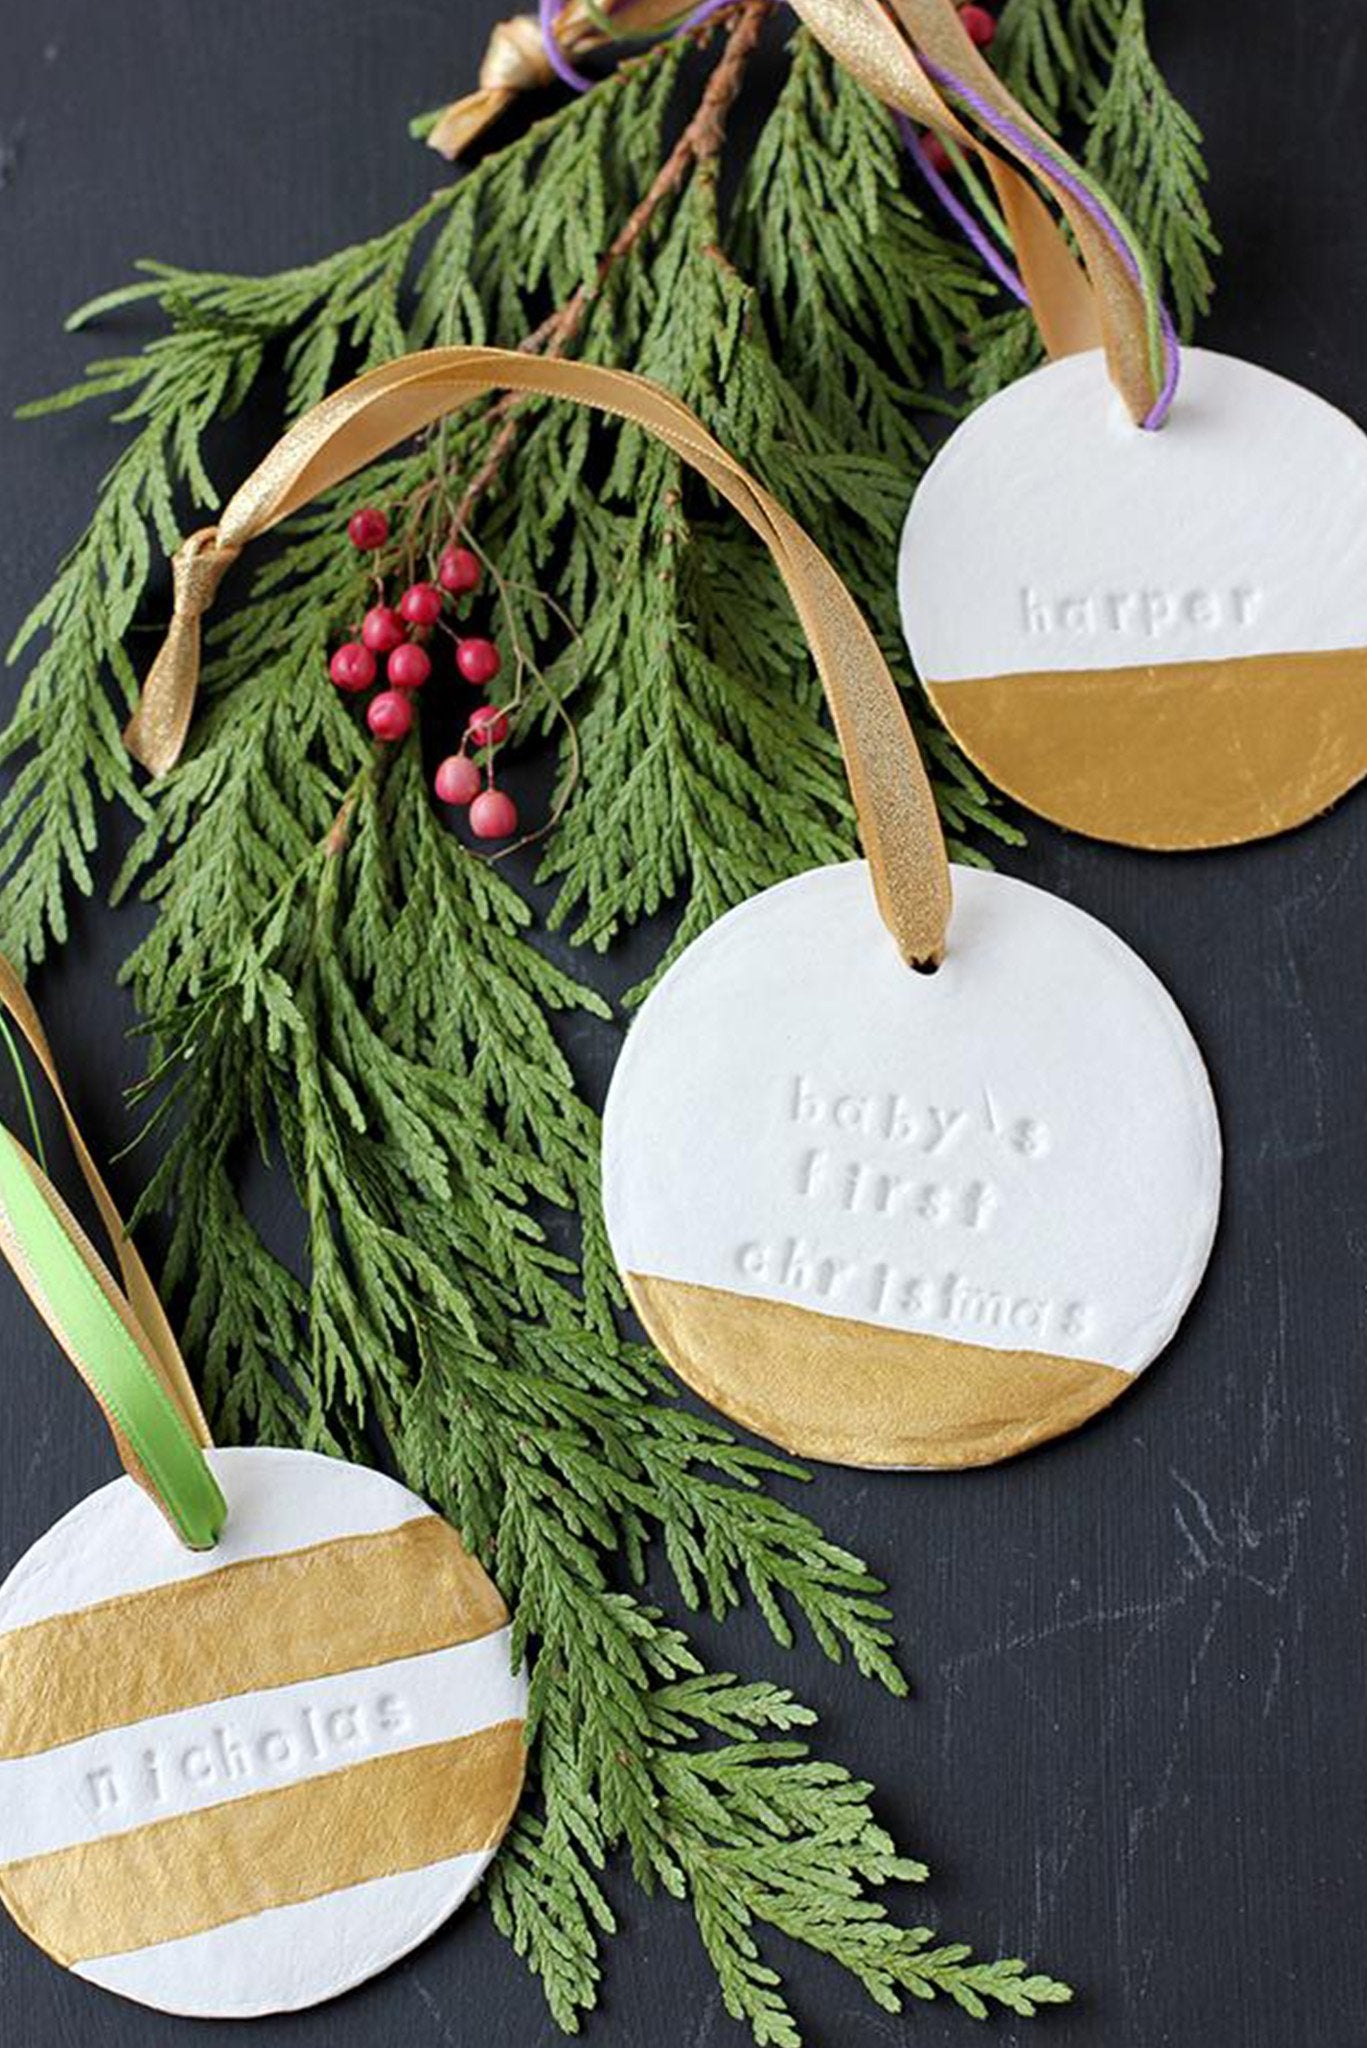 3 Bulk Christmas Gifts You Can Make in a Clear Ornament